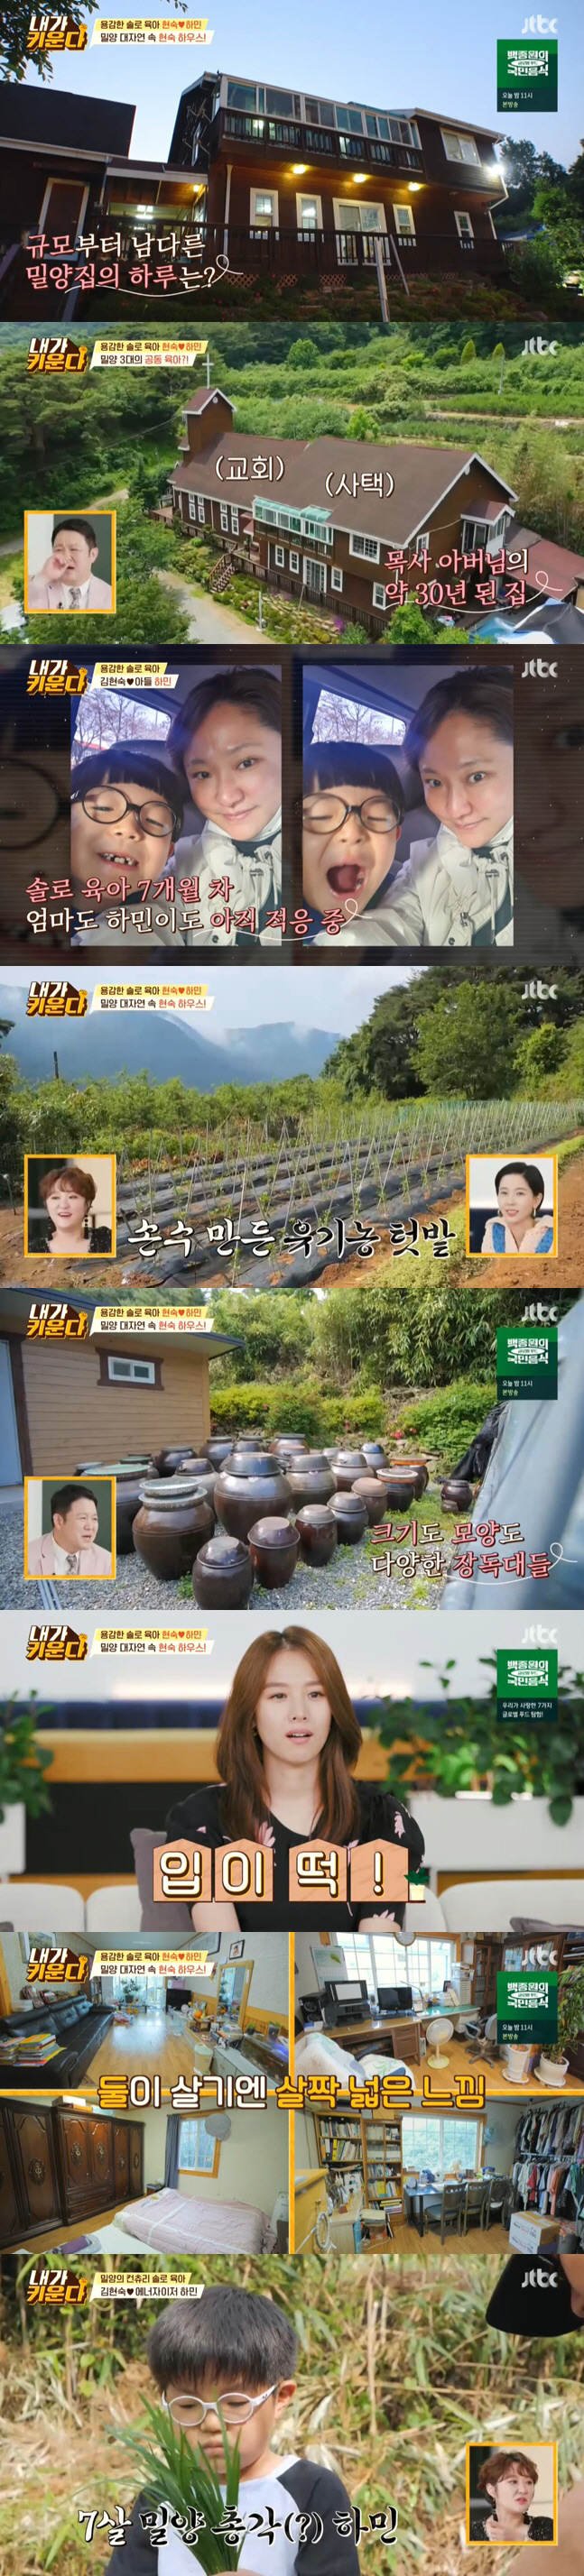 I raise it Kim Hyun-Sook first unveiled Secret Sunshine life with 7-year-old son.On the 16th, JTBC Brave Solo Parenting - I Raise, Cho Yoon-hee, Roas familys playground visiter and Kim Hyun-Sook and son Hamins Secret Sunshine life were revealed.On this day, Kim Hyun-Sook revealed the secret sunshine life with son Hamin.Kim Hyun-Sook has caught the attention of the performers by revealing the Parenting environment where three generations live together from Secret Sunshine to seven-year-old son Min and his parents.The morning table, which is made of miso and grown vegetables, as well as a nature-friendly house with a large yard to a garden, bought the envy of all performers.Kim Na Young, who saw it as a VCR, shouted I envy and said, Please find a house in Secret Sunshine.